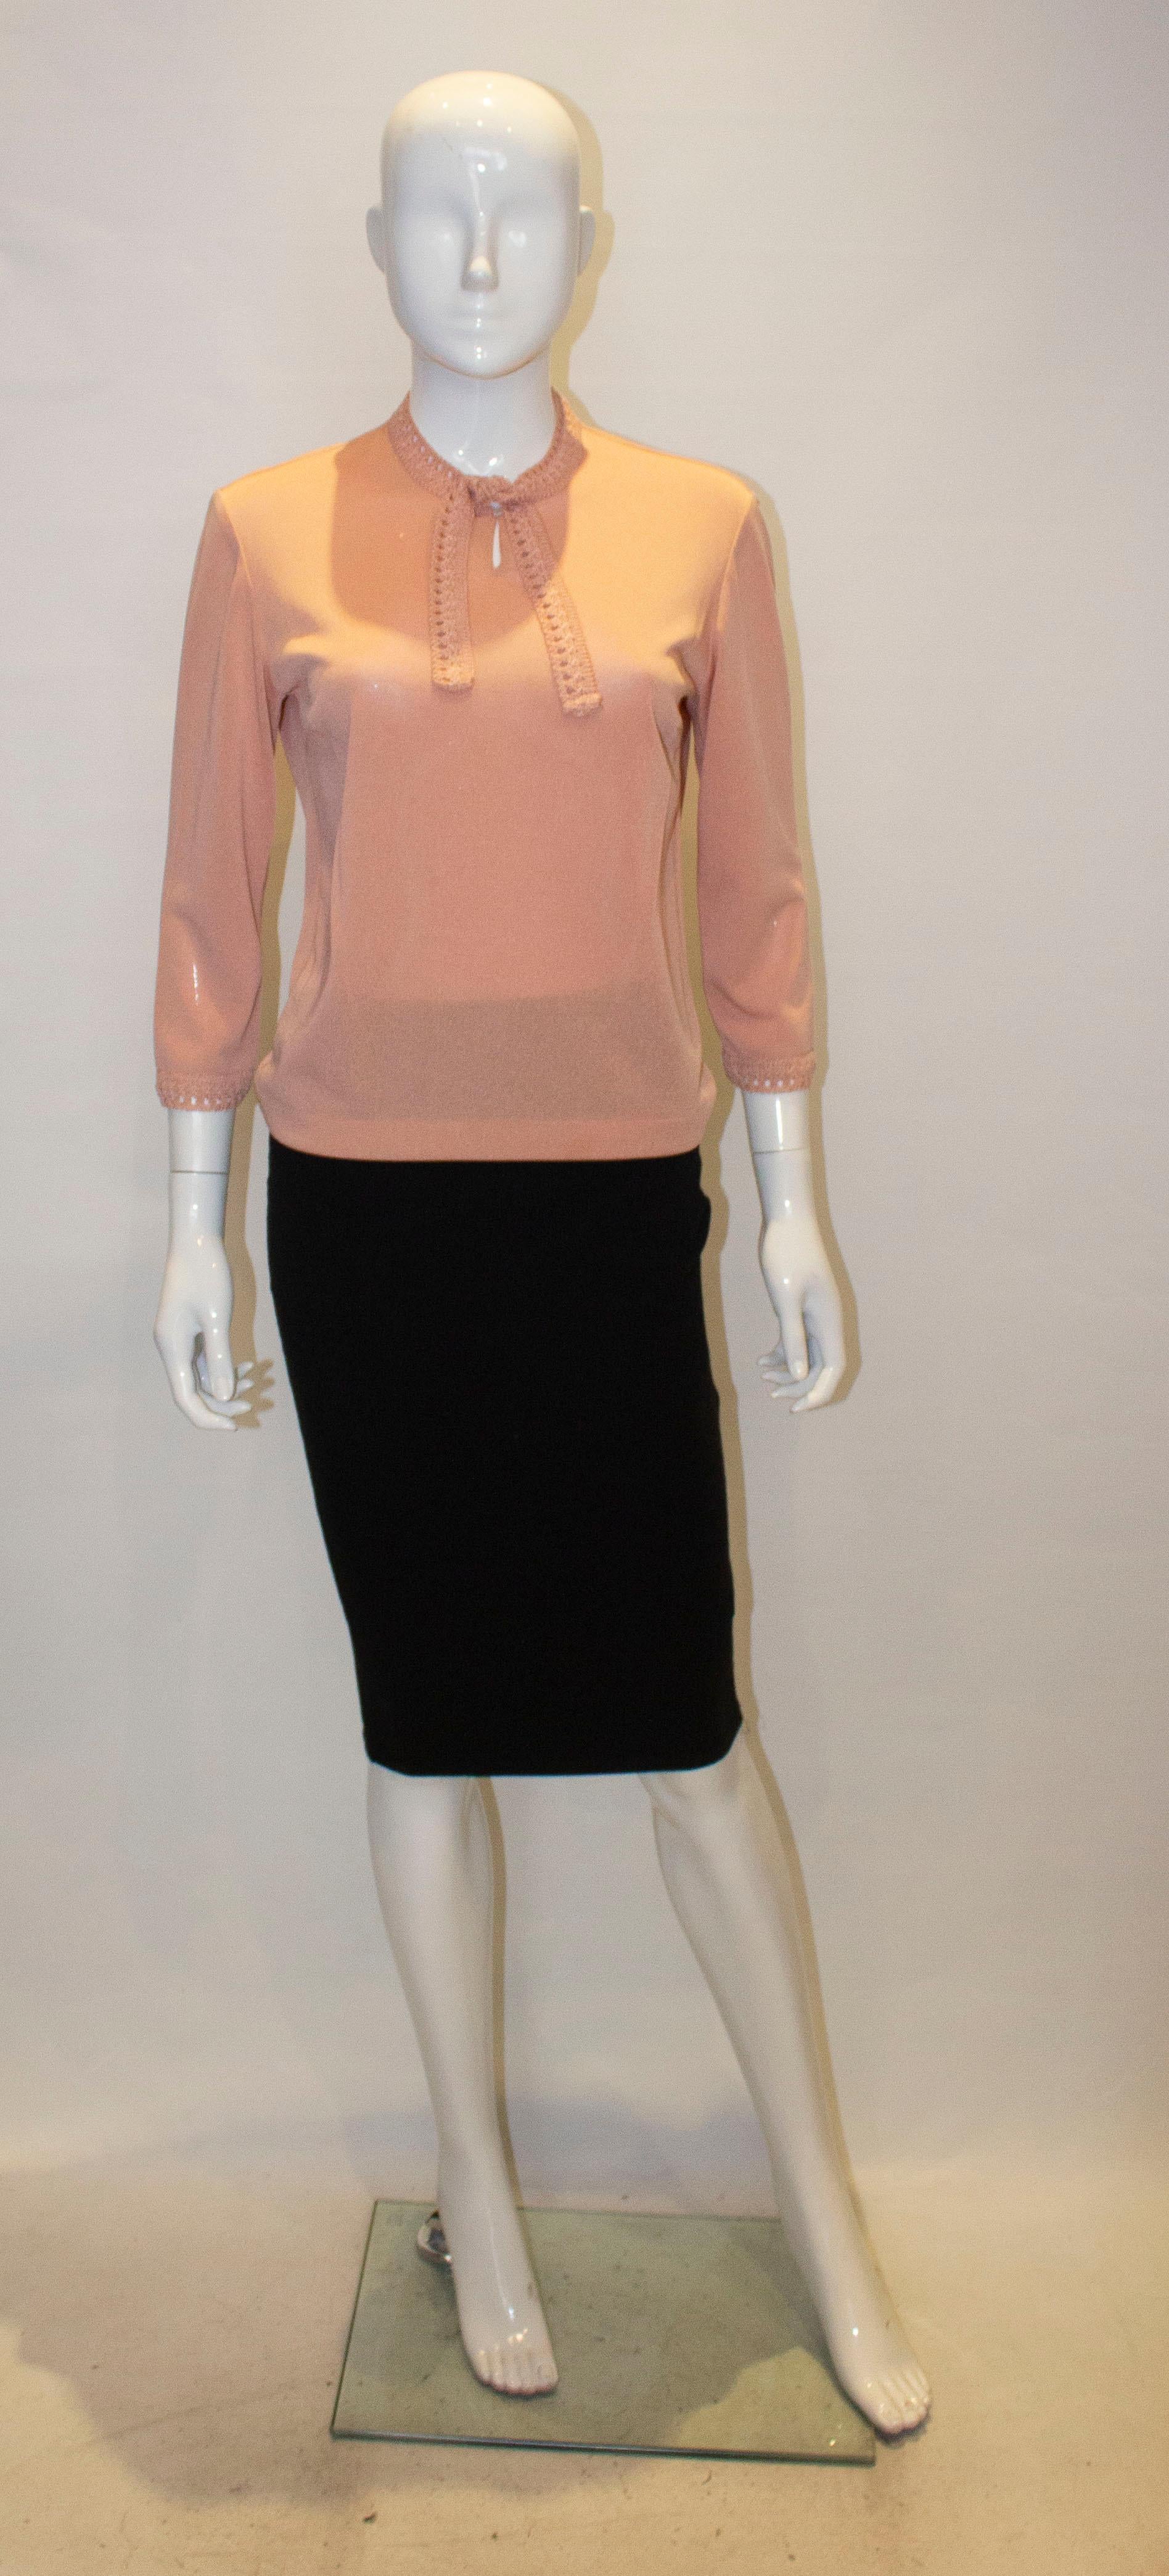 A pretty vintage knit for Spring by Creation Anne Laroye.In a pretty pink colour the top has decoration at the neck and the cuffs, with a tie at the neck and a single button opening. 